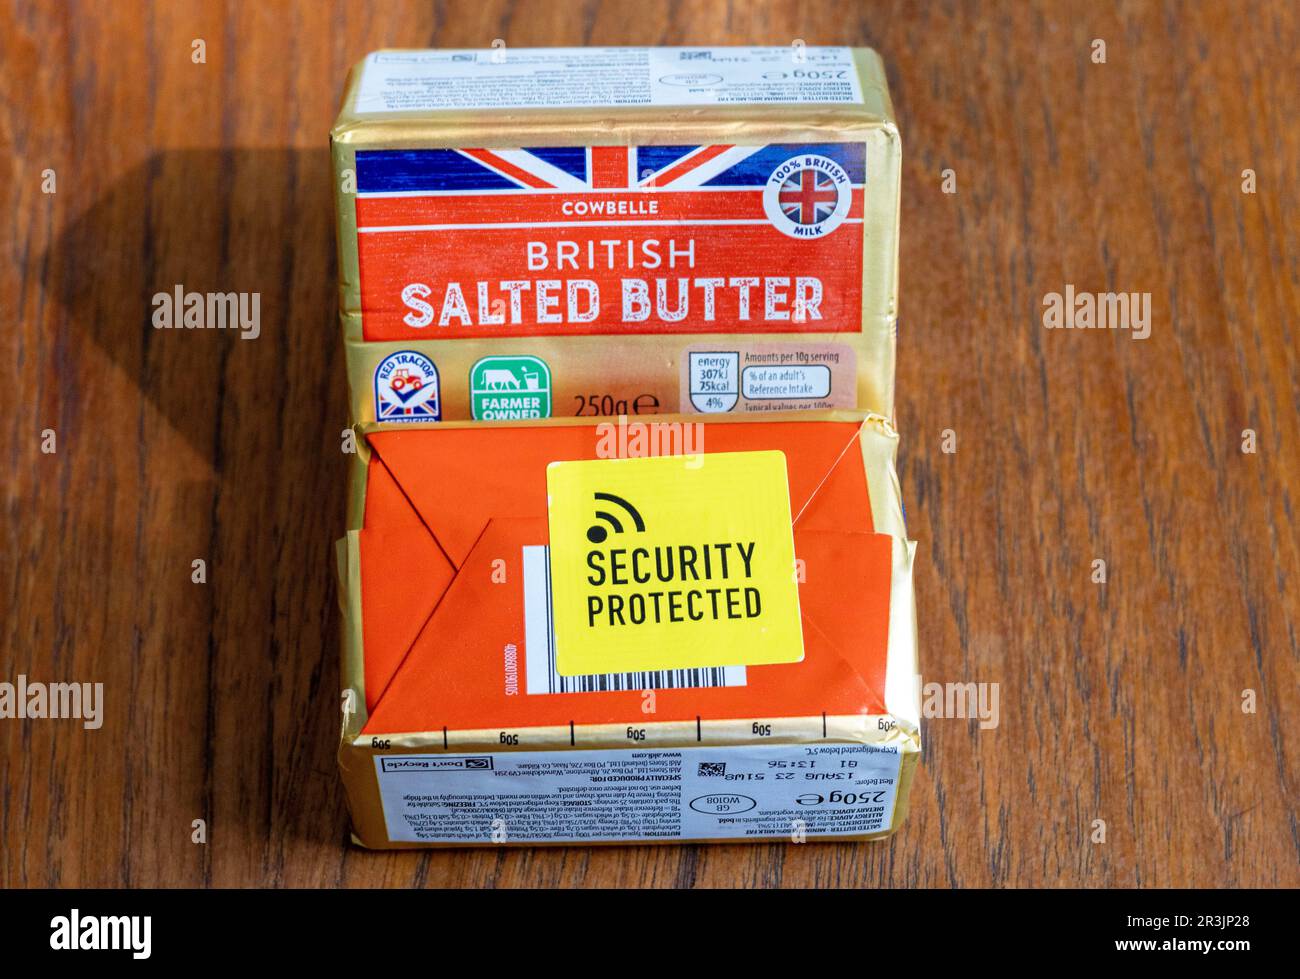 Pic shows: Food inflation  Aldi Cowbelle  British Butter now being security tagged  It costs £1.89  London woman was stopped at security after the but Stock Photo